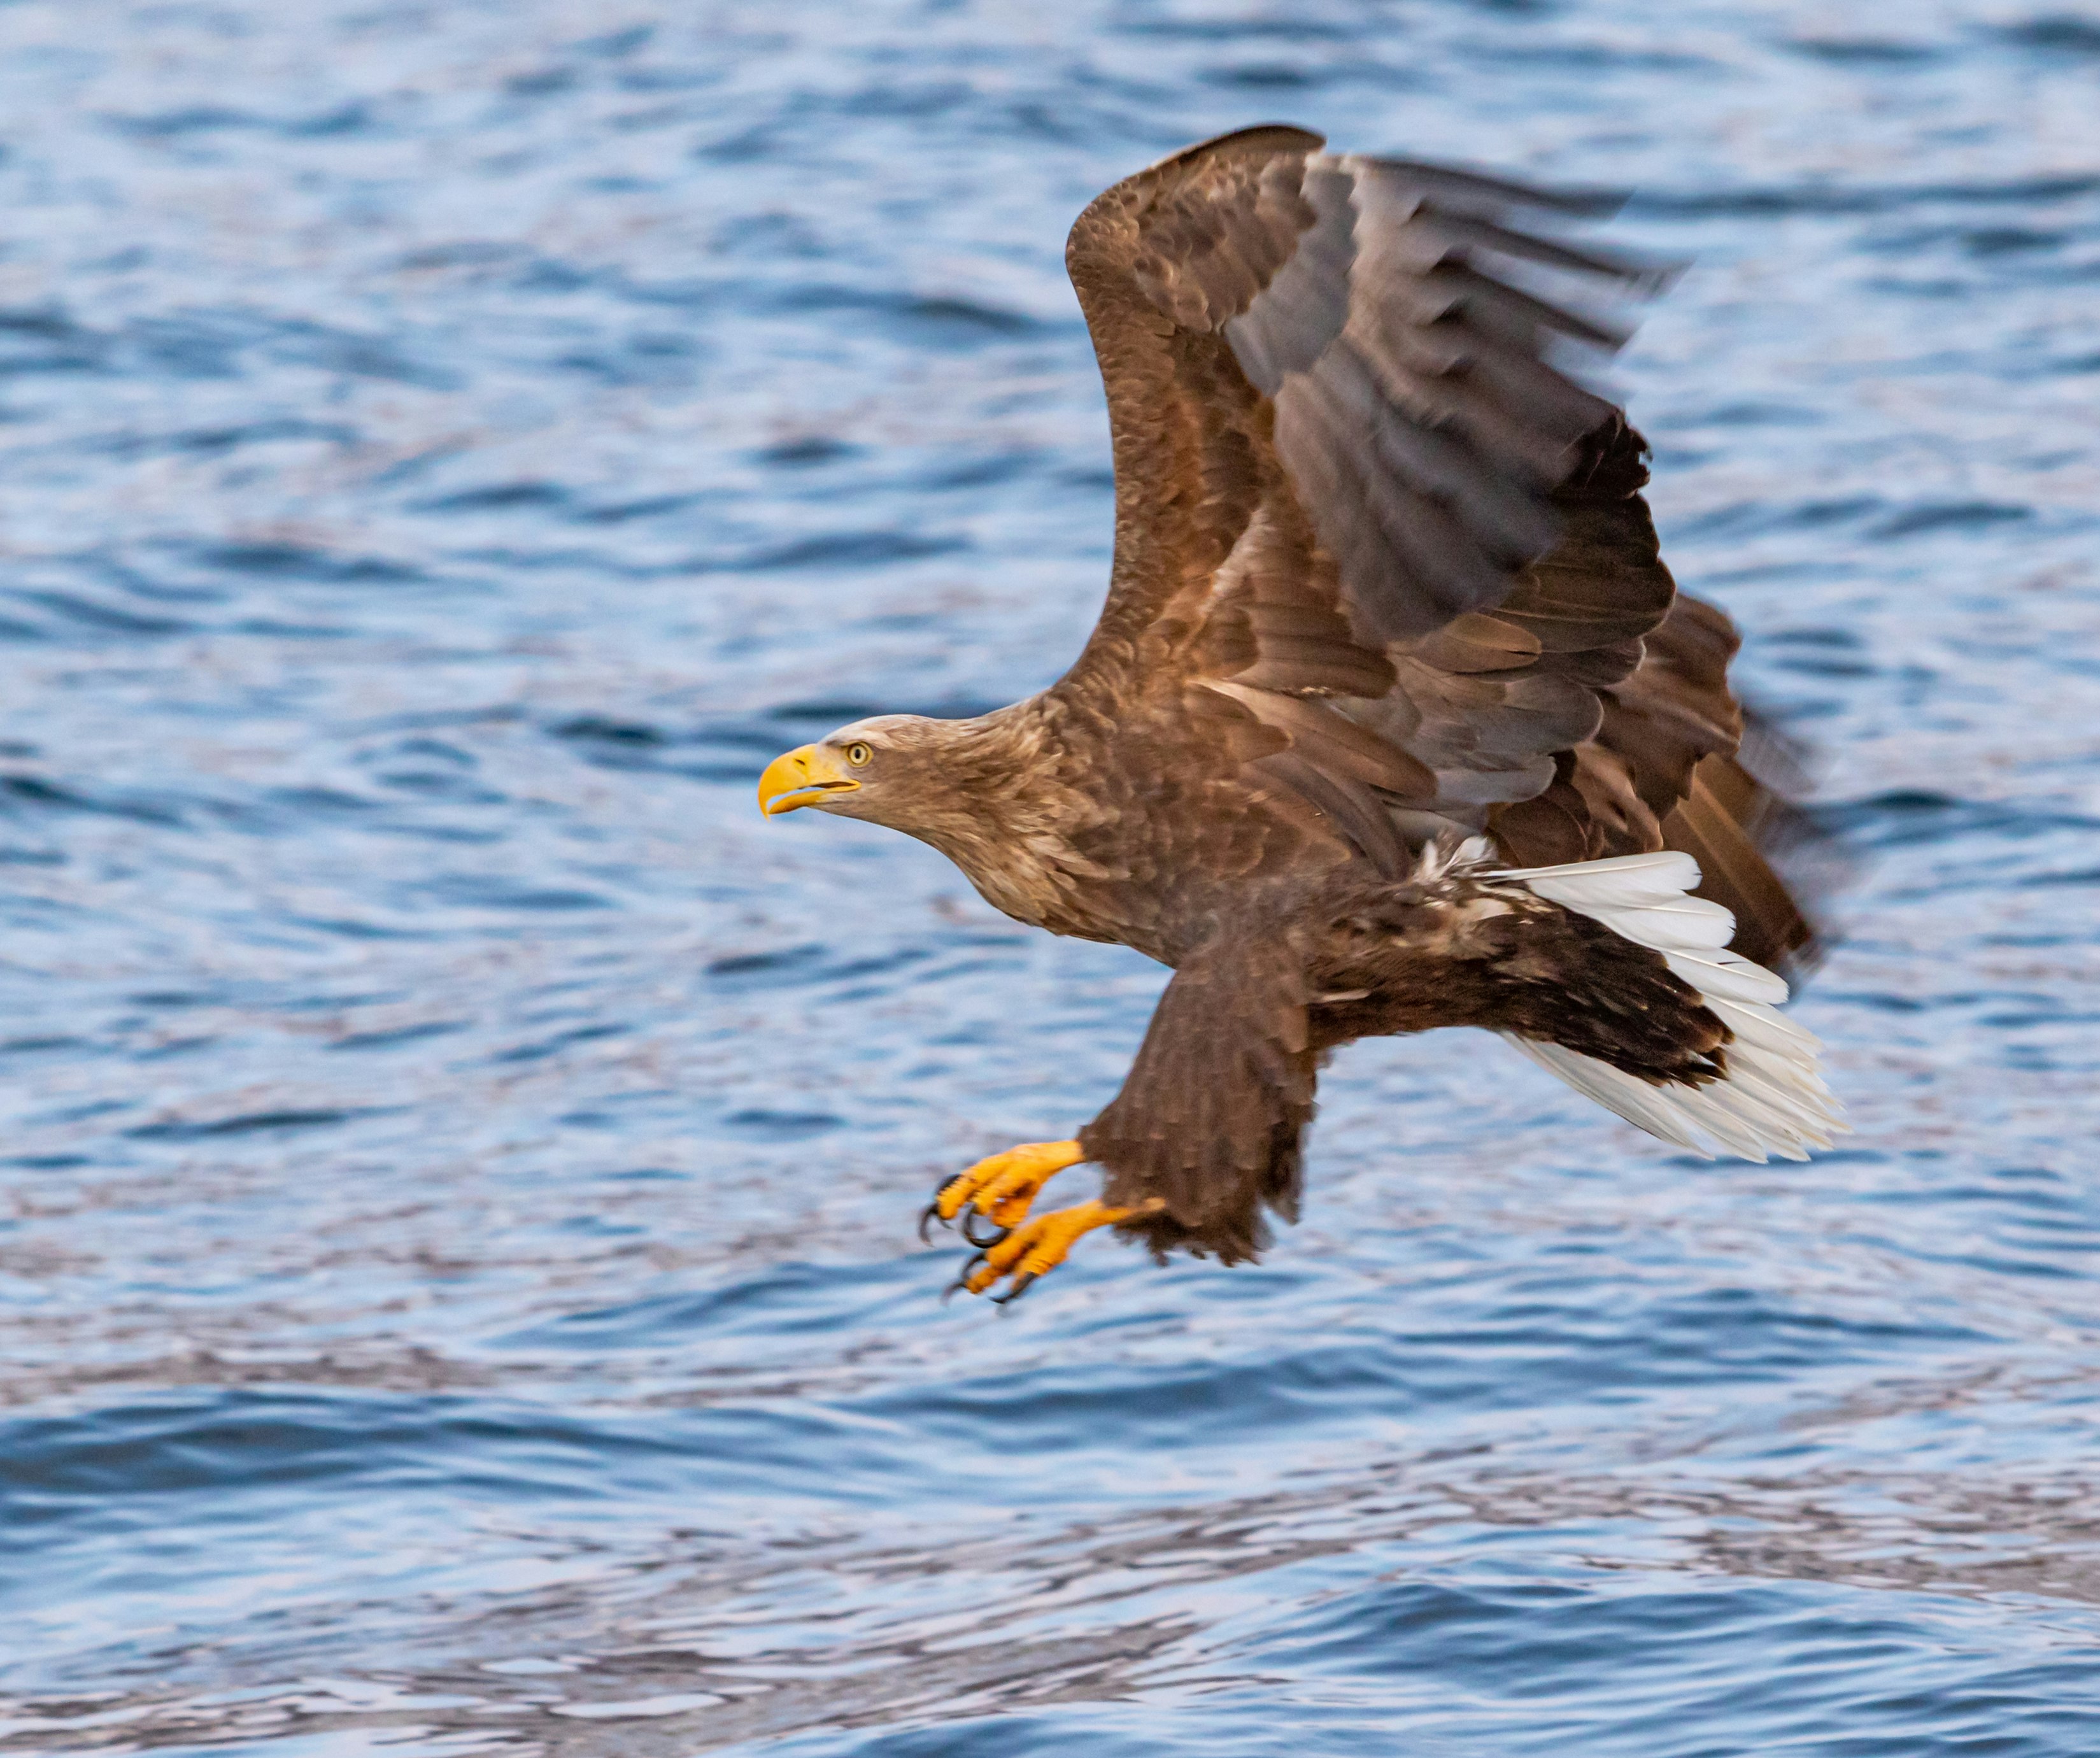 eagle about to catch fish on calm water at daytime